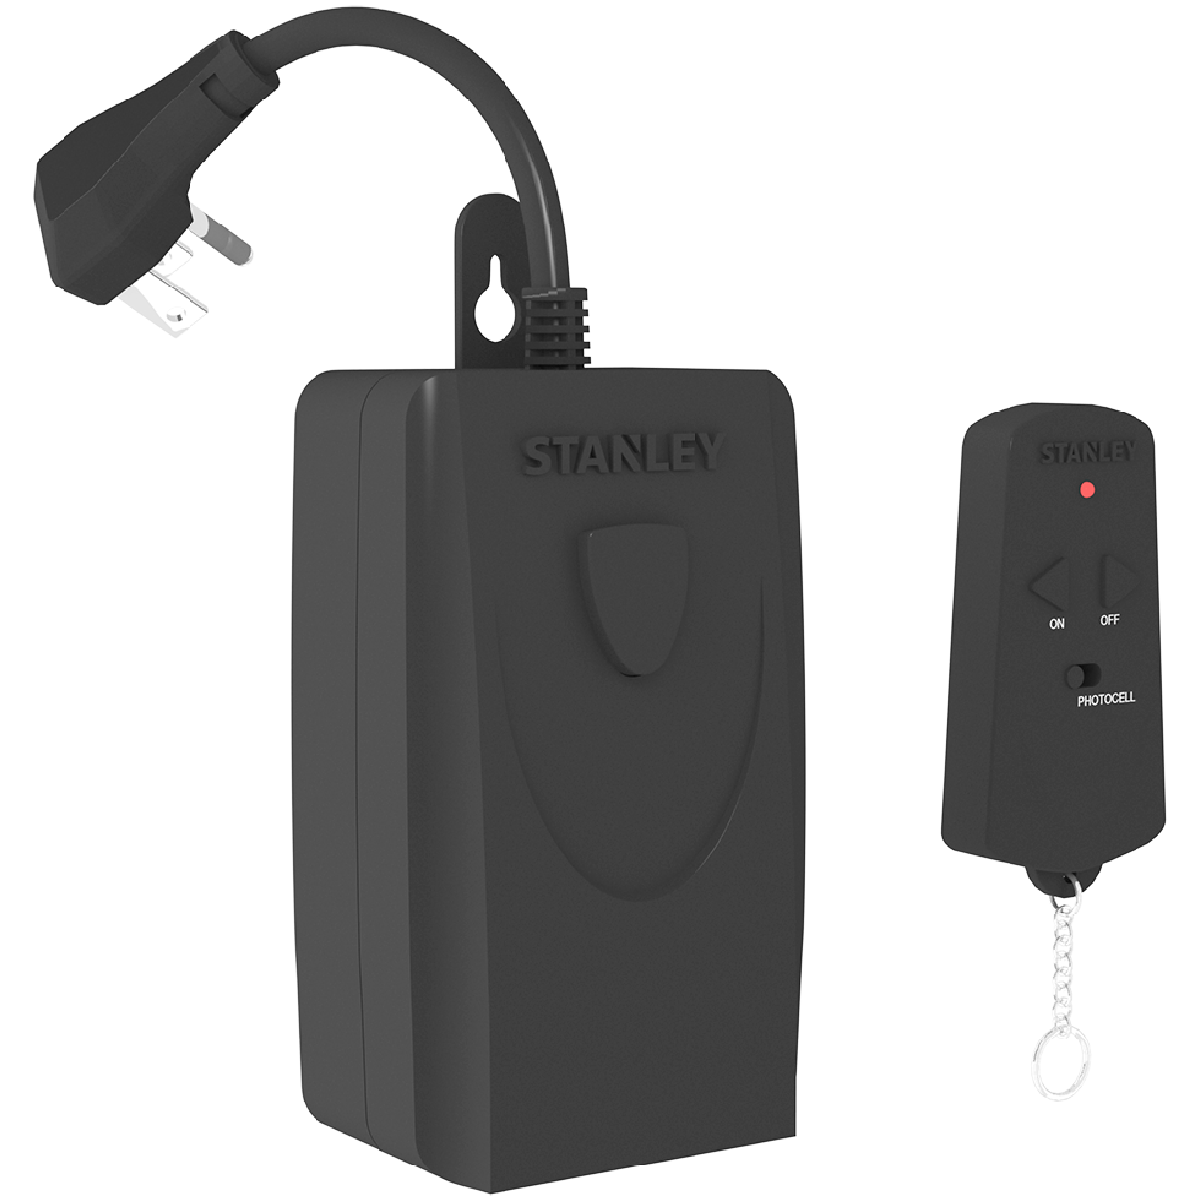 STANLEY OUTDOOR REMOTE CONTROL - Stanley Electrical Accessories